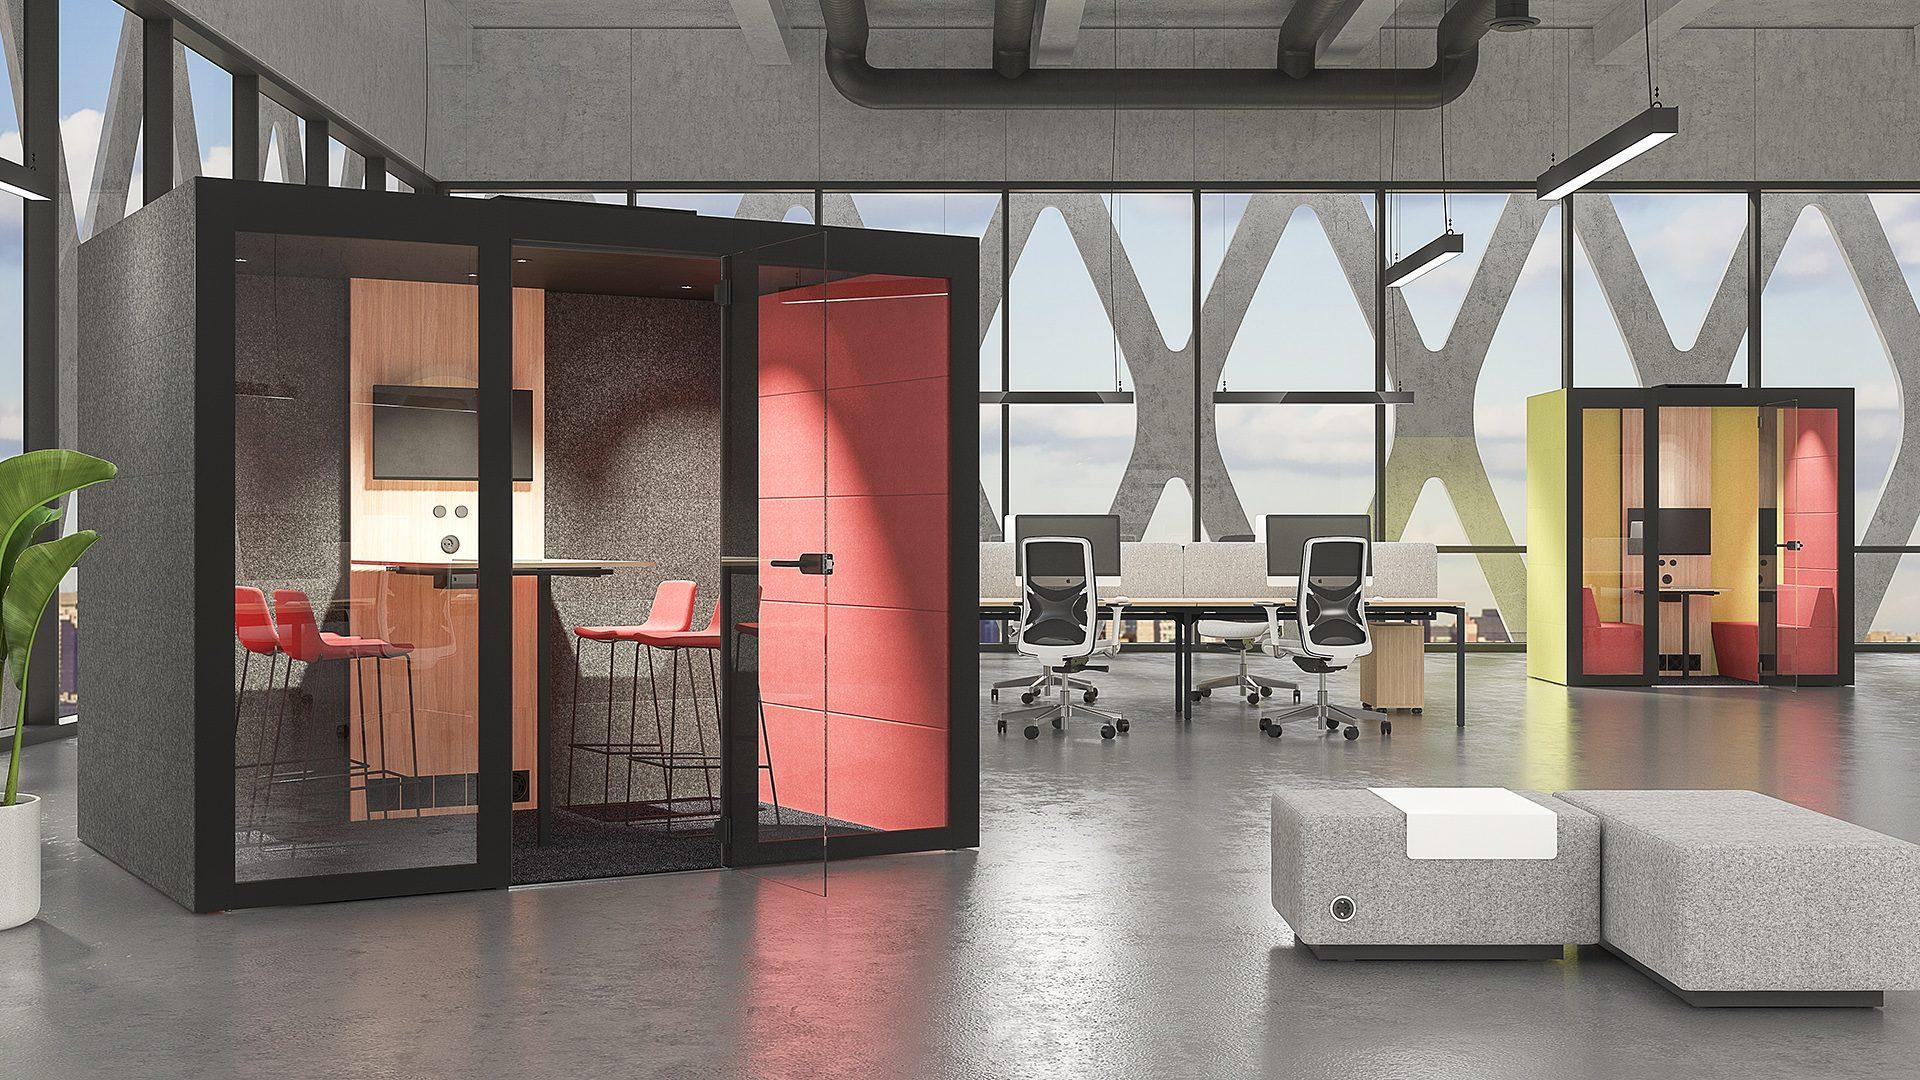 Silent Room ensures air quality as well as acoustic and visual comfort for users